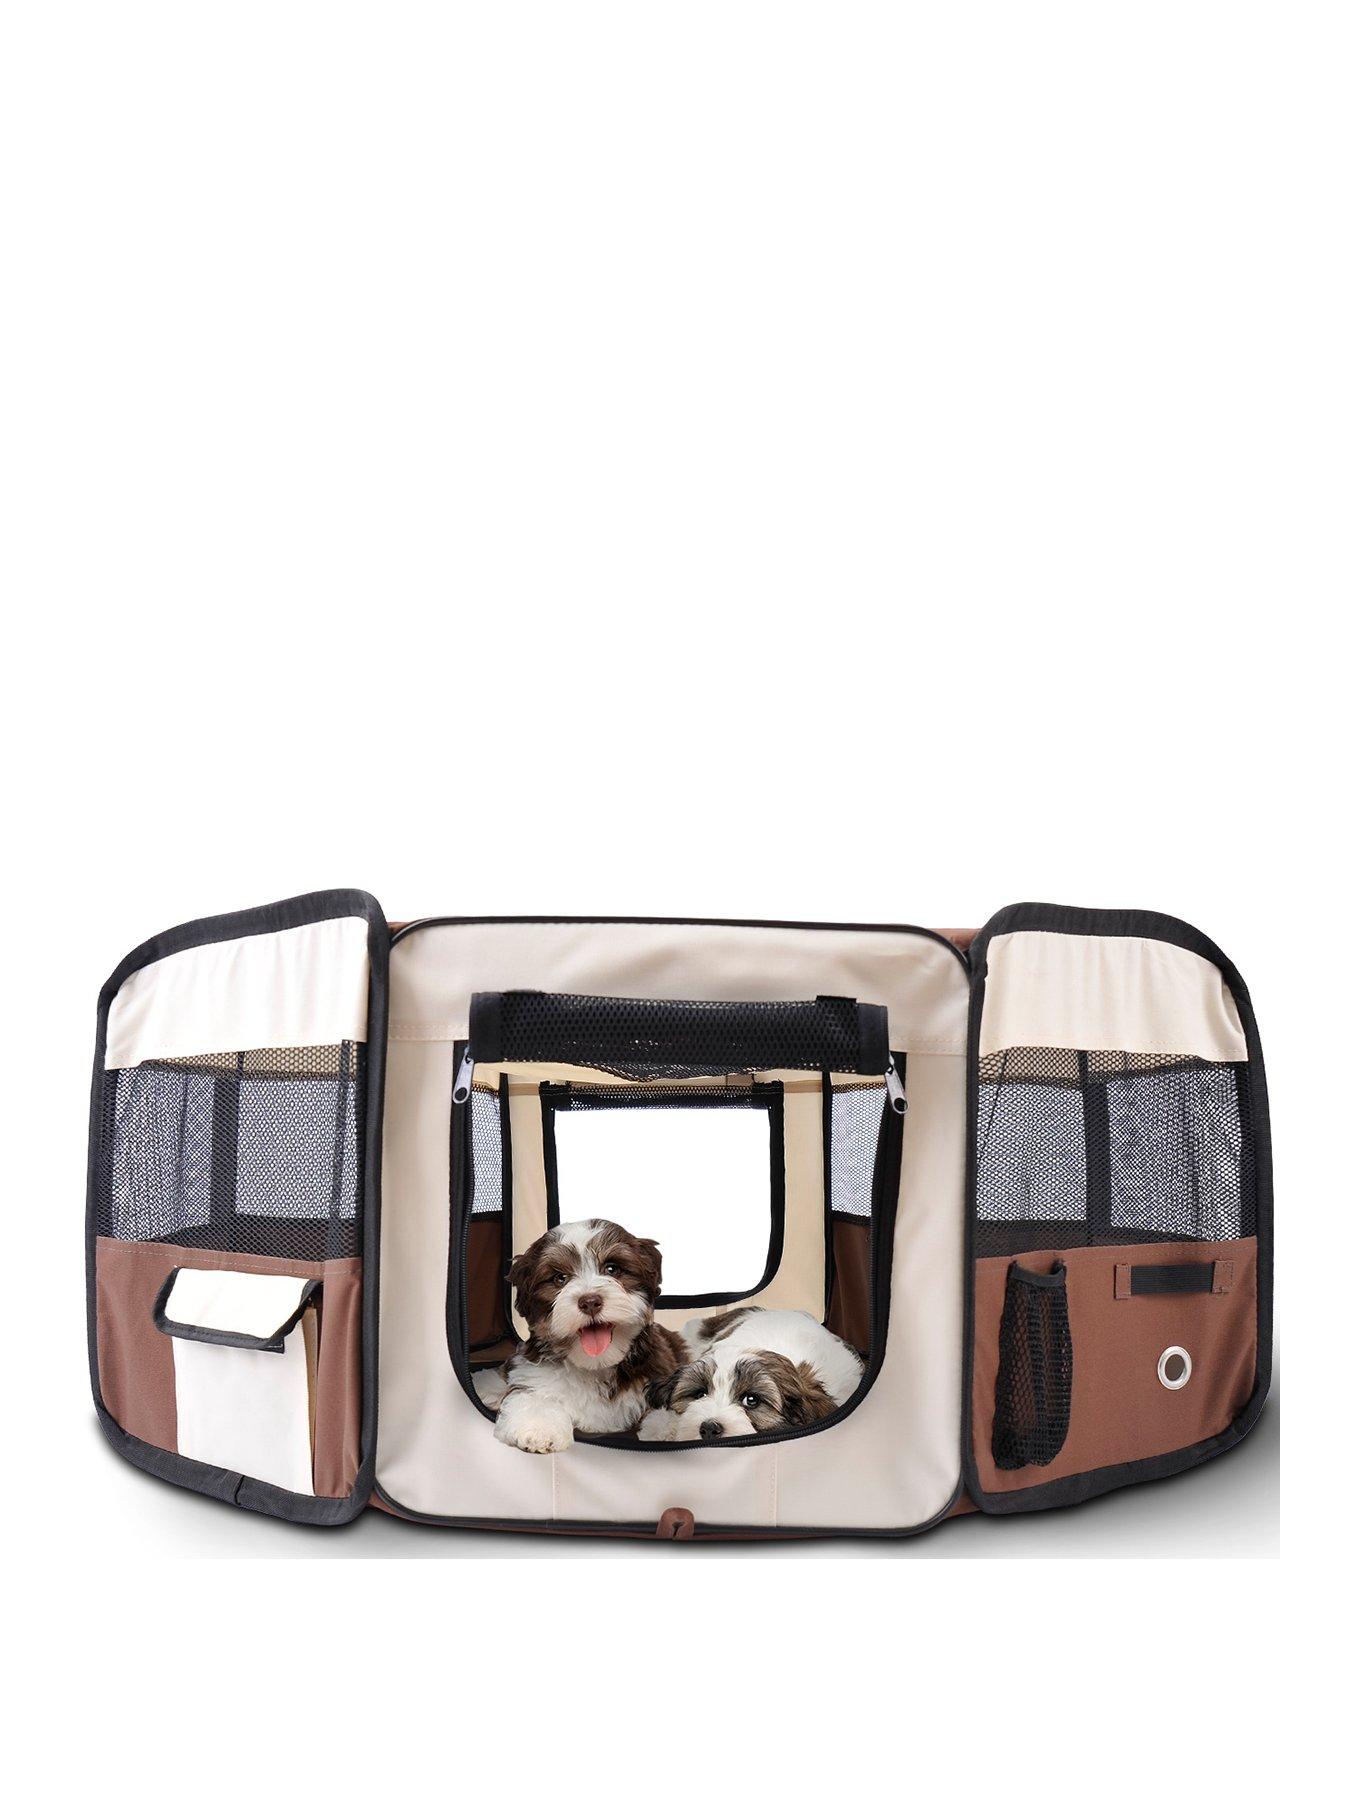 Portable Cat Dog Crate Water Resistant Shade Cover Foldable Dog Case Tent 1122 Sunherry Collapsible Travel Crate for Dogs/Cats/Rabbit 